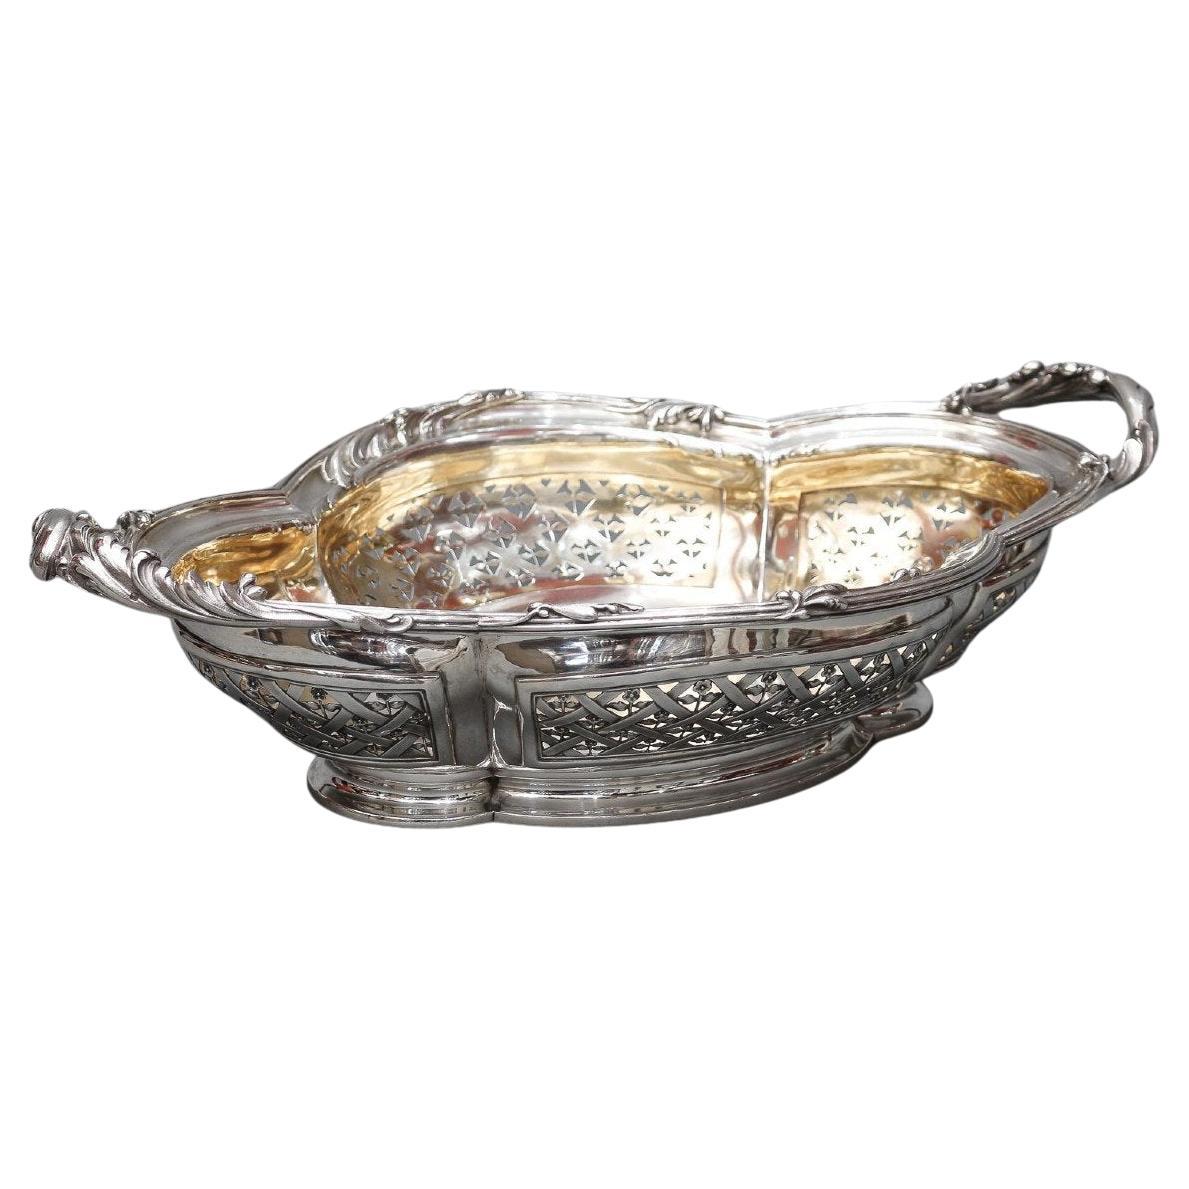 Cardeilhac - 19th Century Solid Silver Fruit Basket